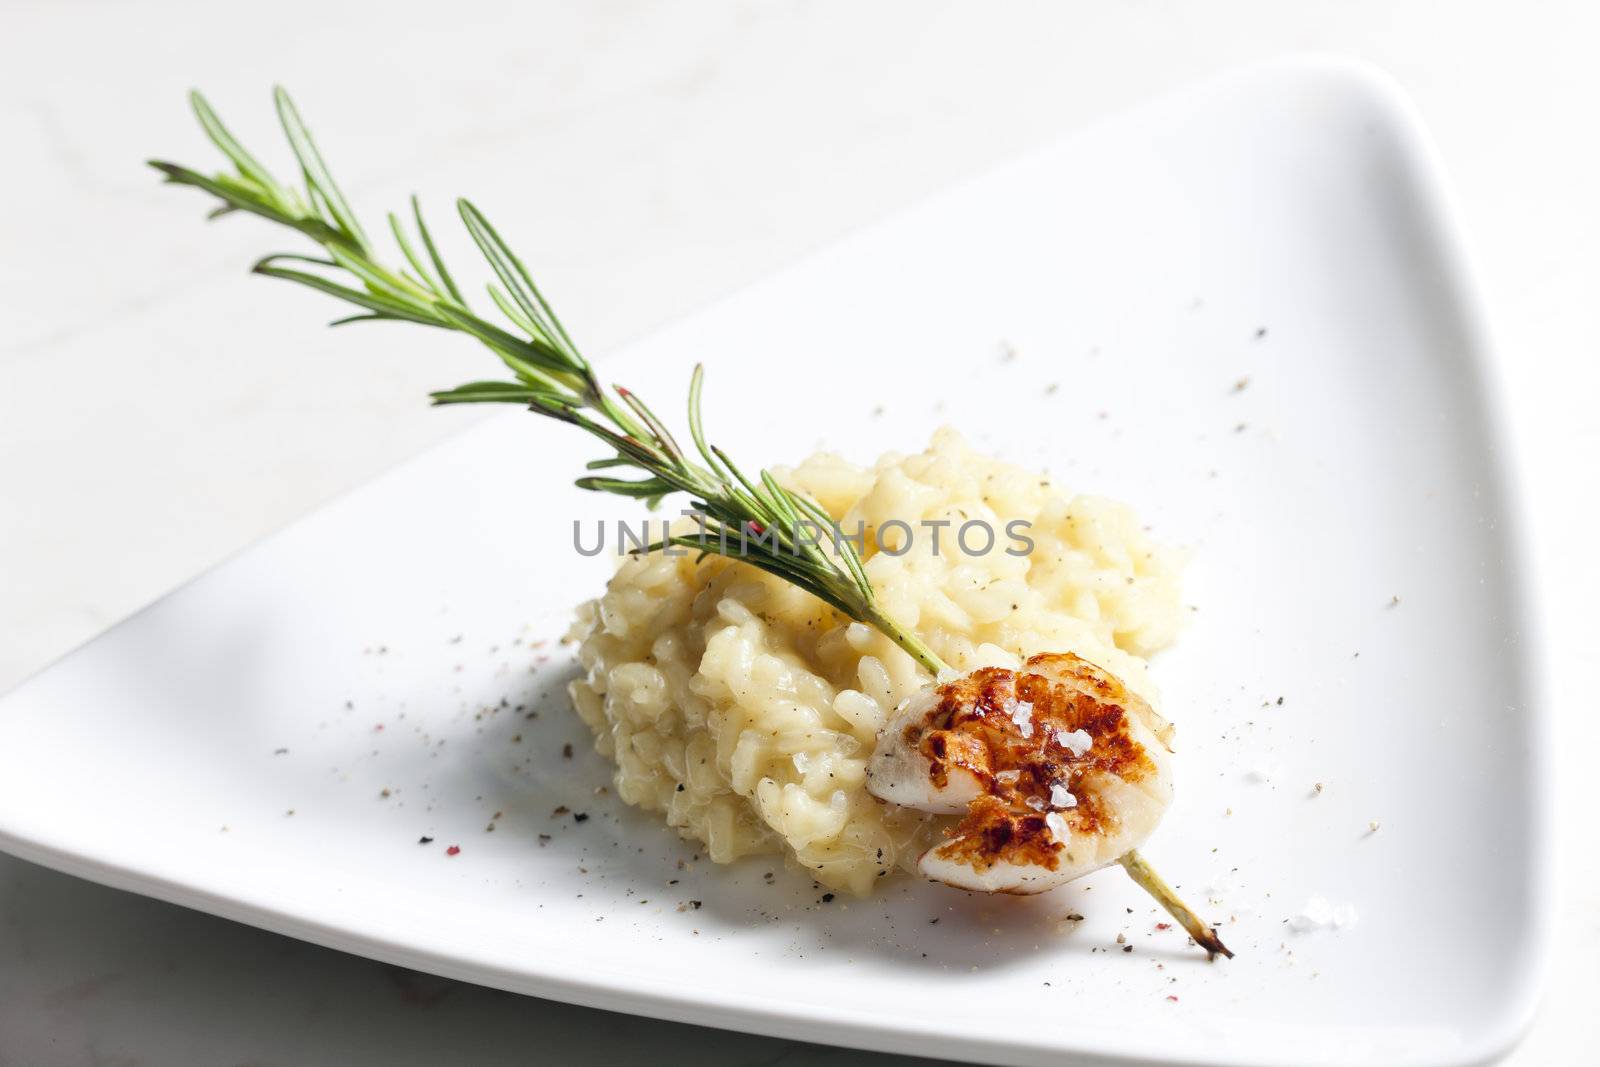 grilled Saint Jacques mollusc on rosemary needle with risotto by phbcz